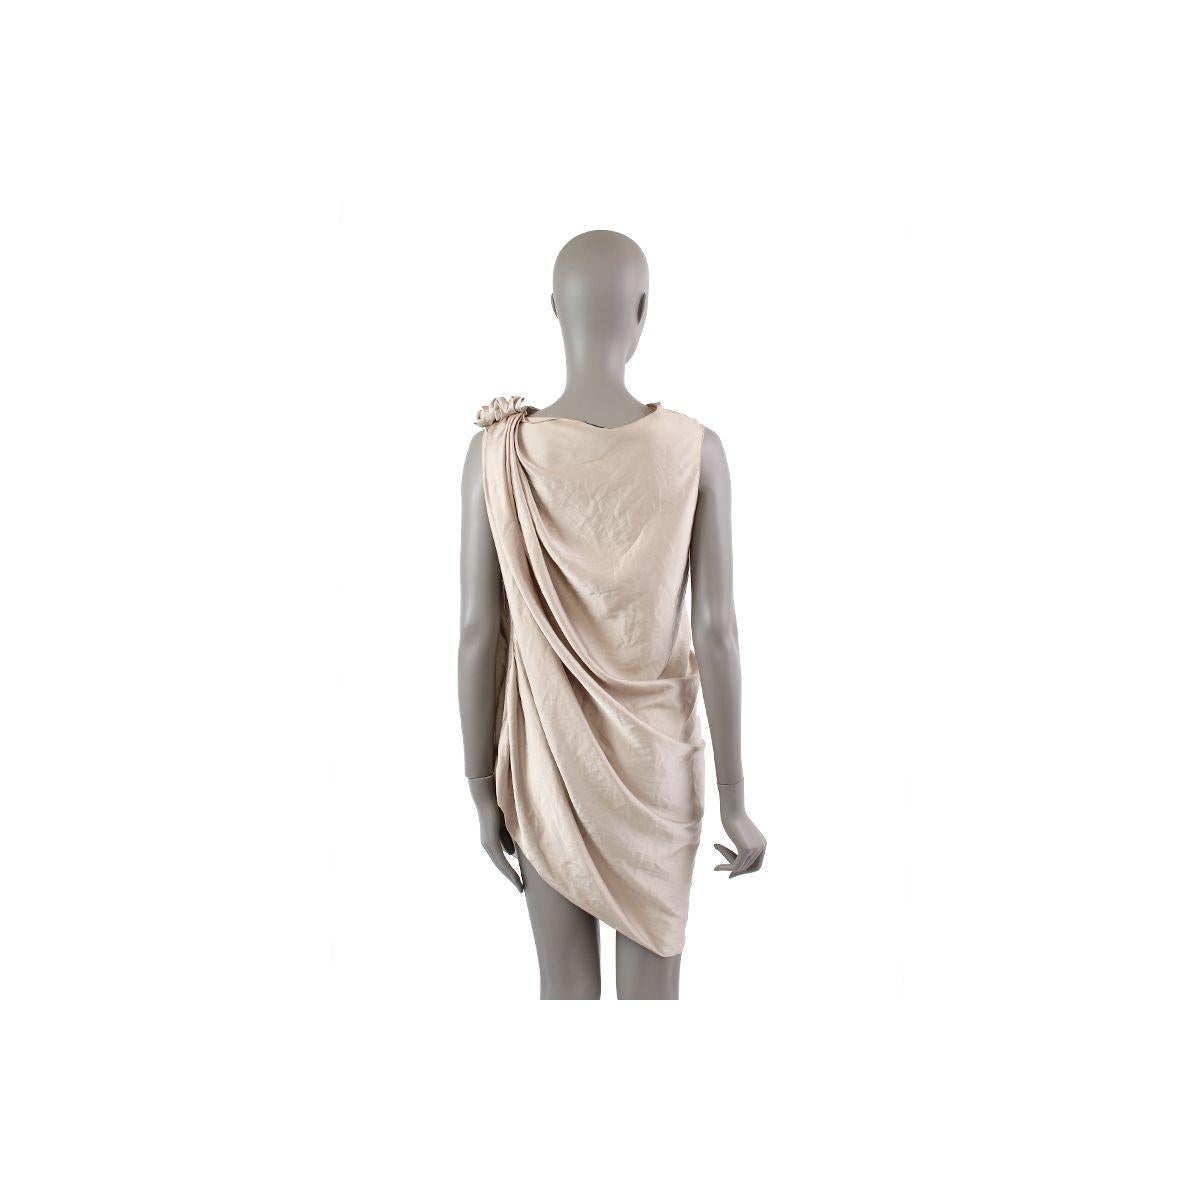 100% authentic Lanvin sleeveless cocktail dress in champagne polyester (100%). Opens with a zipper on the side. Has been worn and is in excellent condition.

Measurements
Tag Size	38
Size	S
Shoulder Width	40cm (15.6in)
Bust To	140cm (54.6in)
Waist